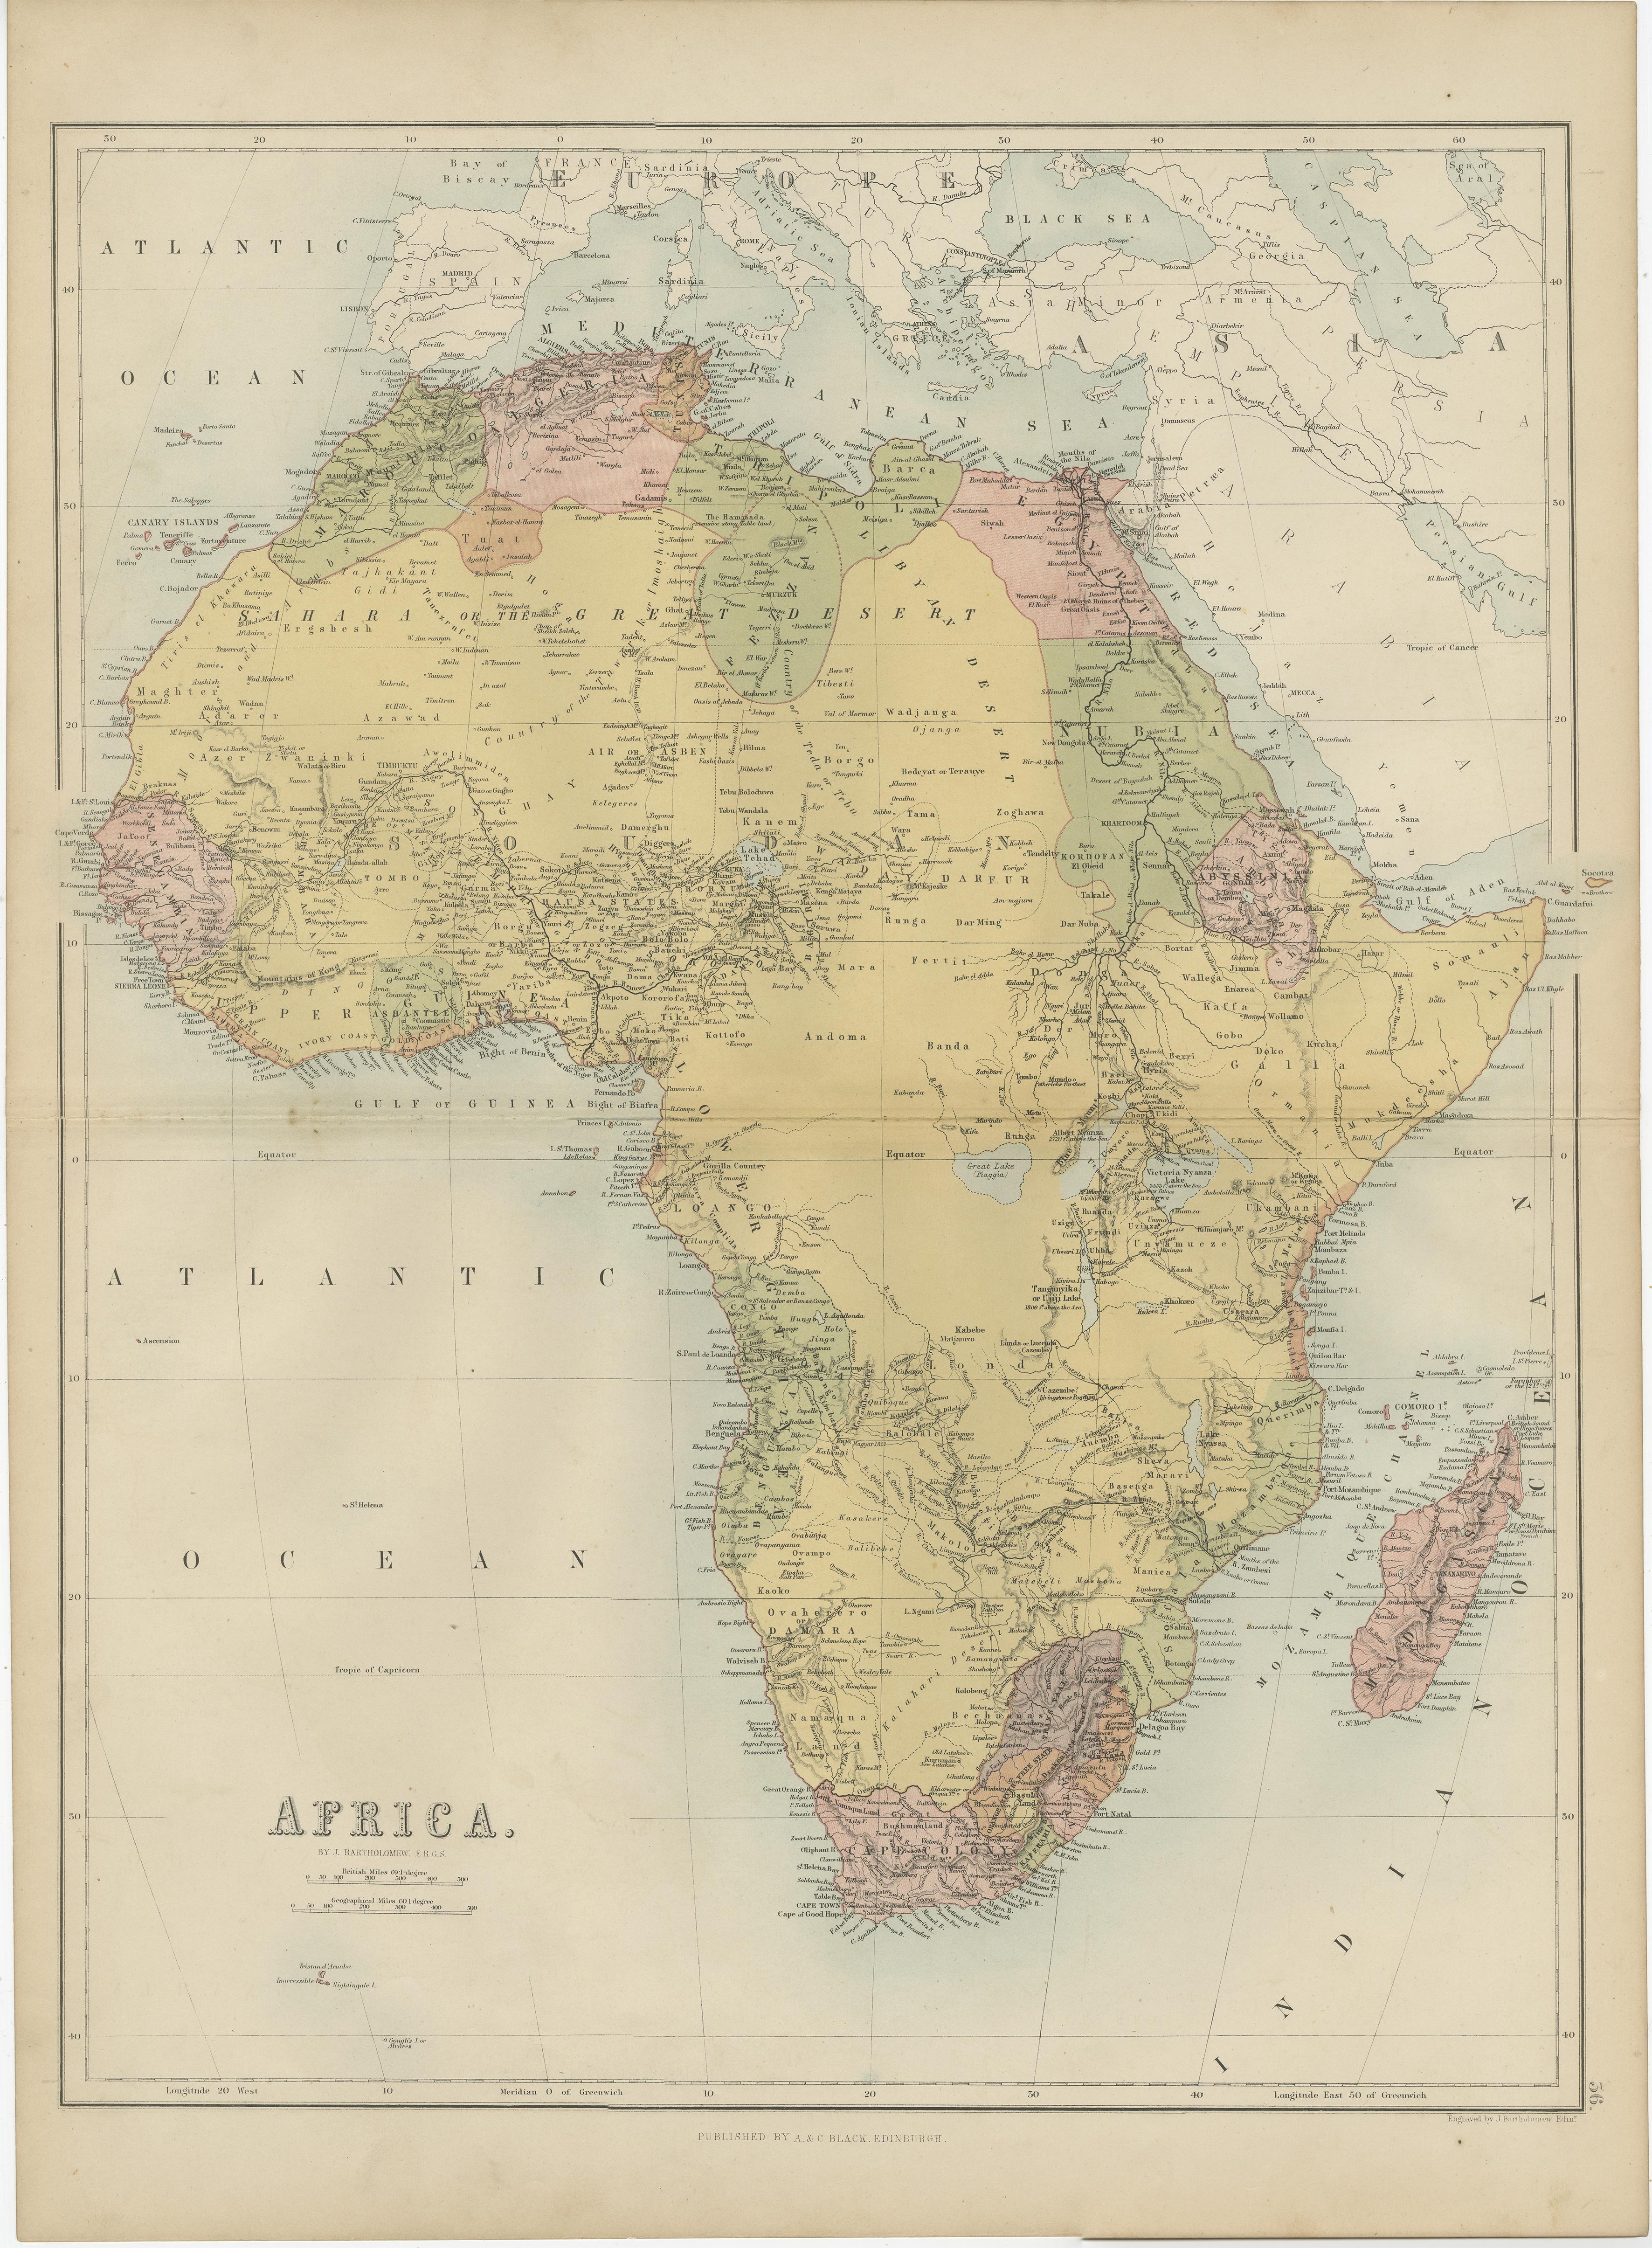 Antique map titled 'Africa'. Original antique map of Africa. This map originates from ‘Black's General Atlas of The World’. Published by A & C. Black, 1870.